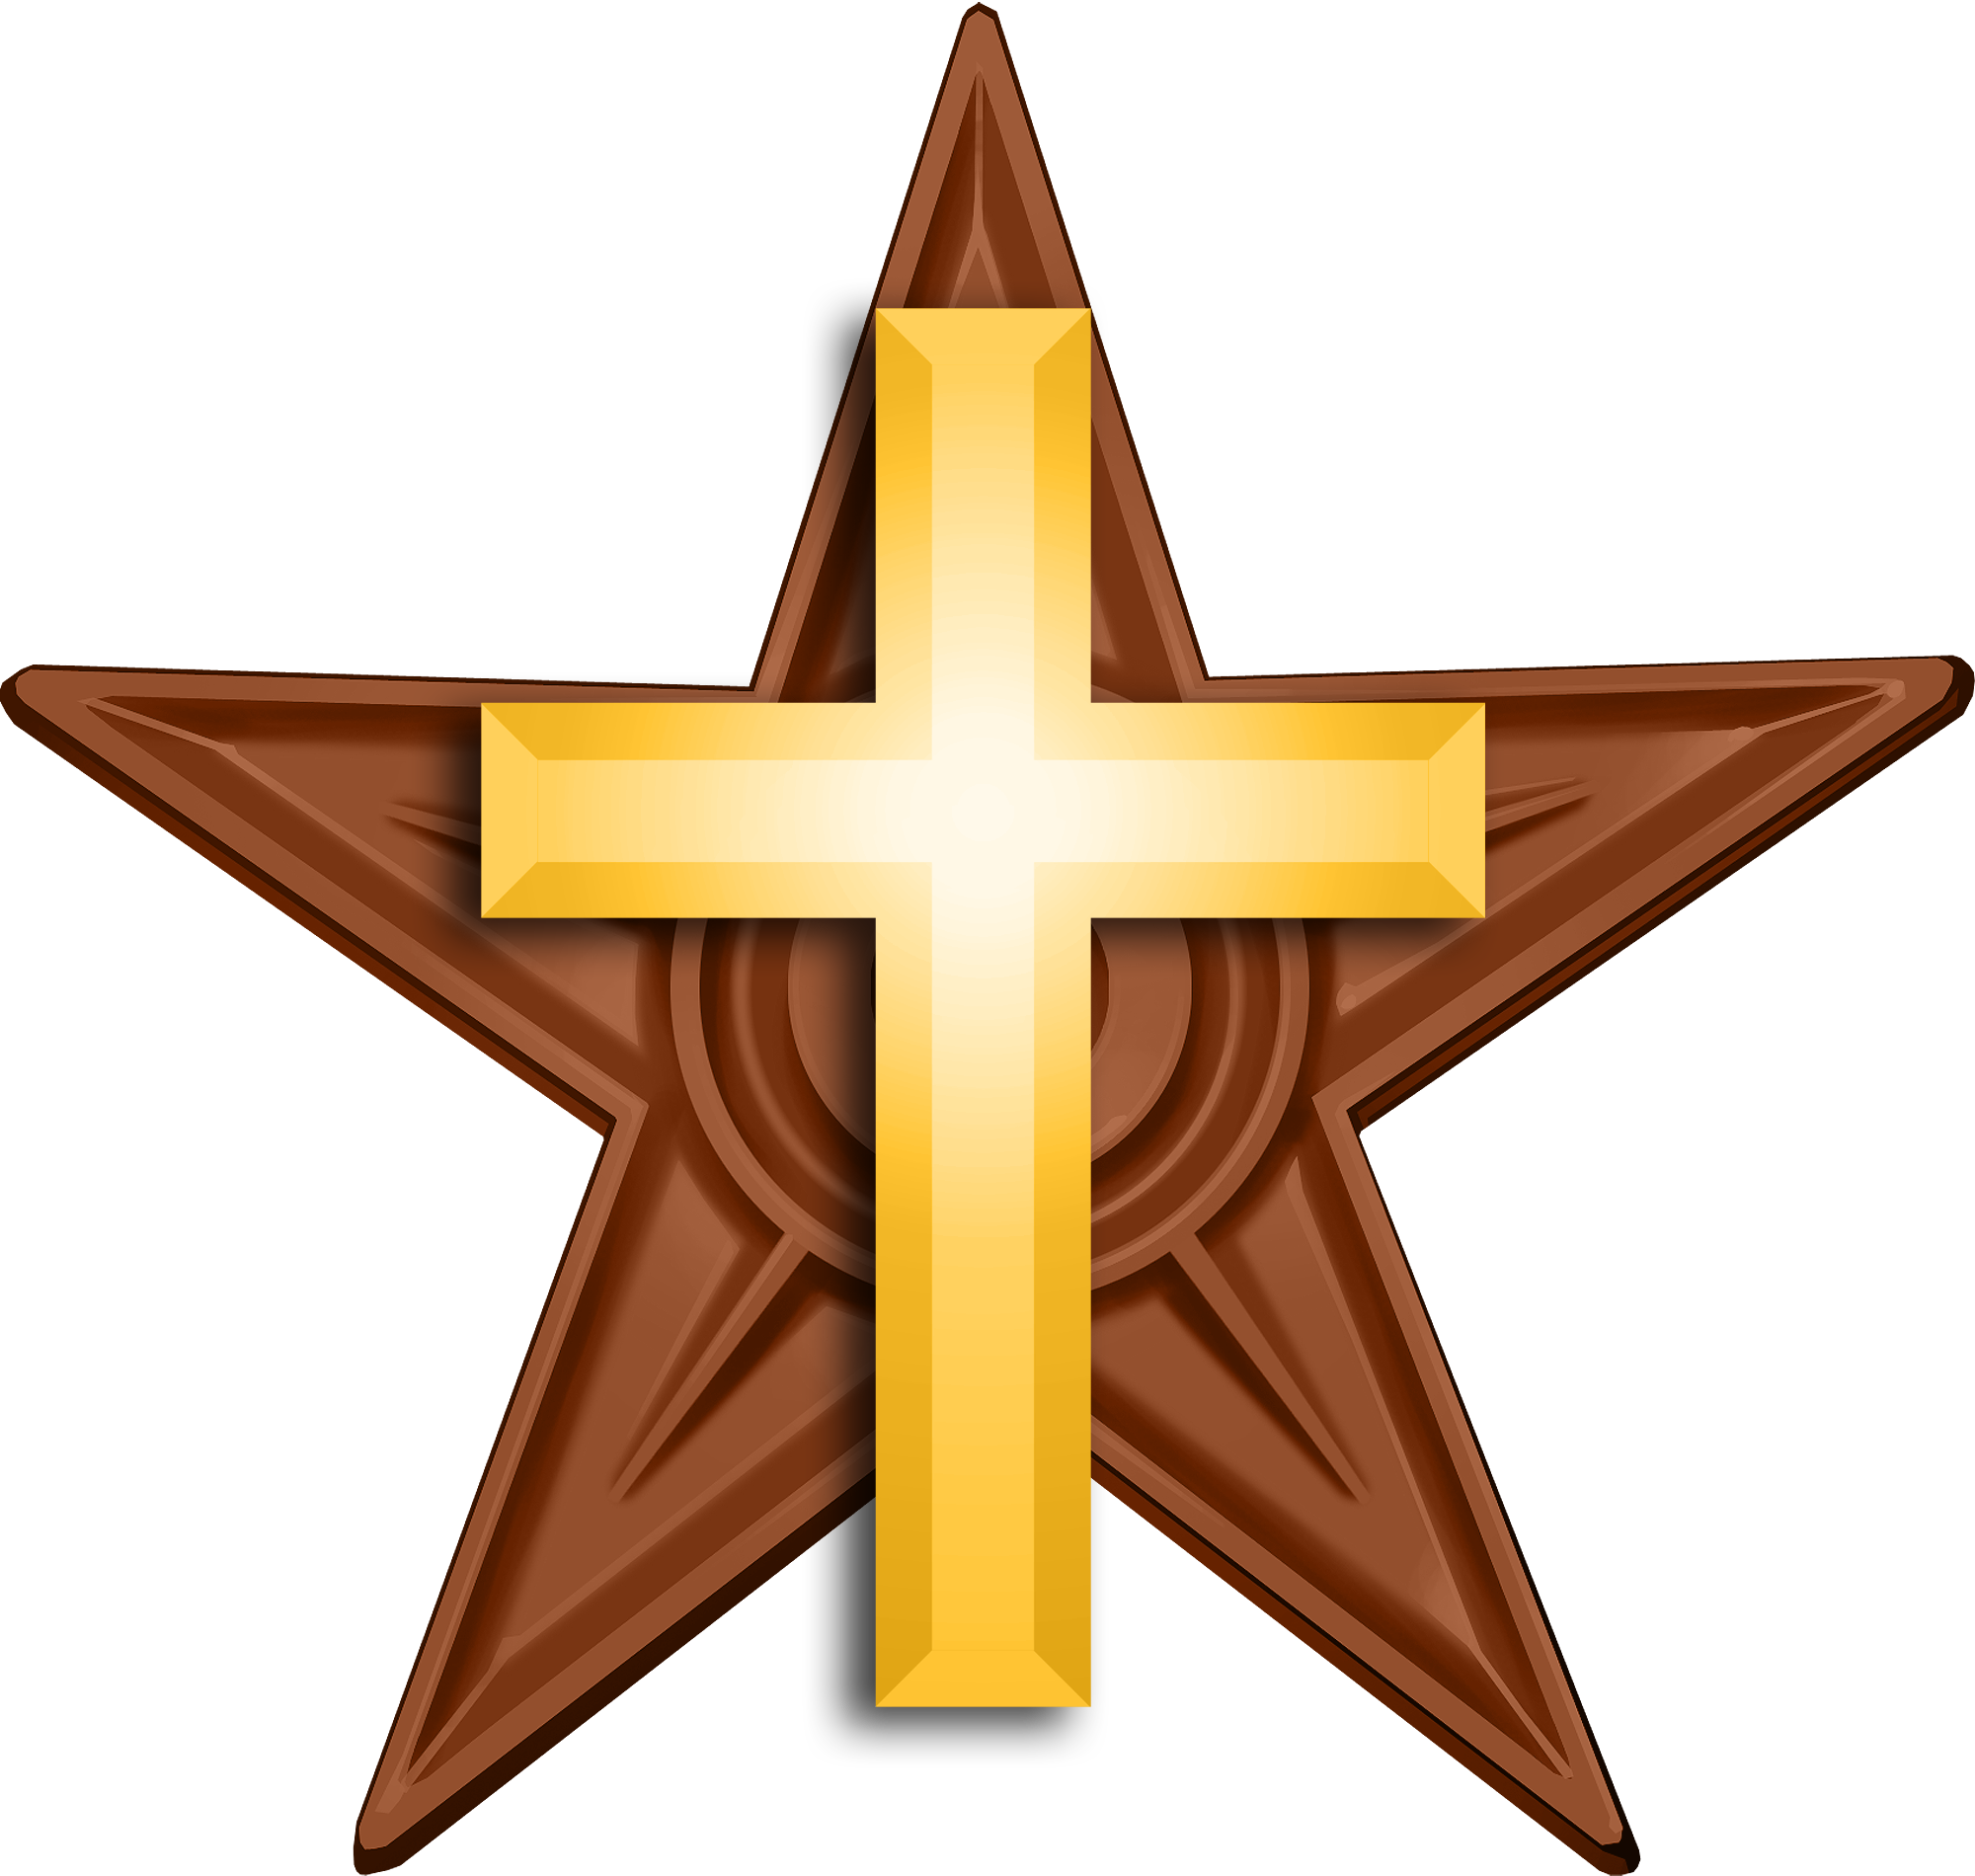 File Christian Barnstar Hires Png Wikimedia Commons - File Christian Barnstar Hires Png Wikimedia Commons (2000x1900)